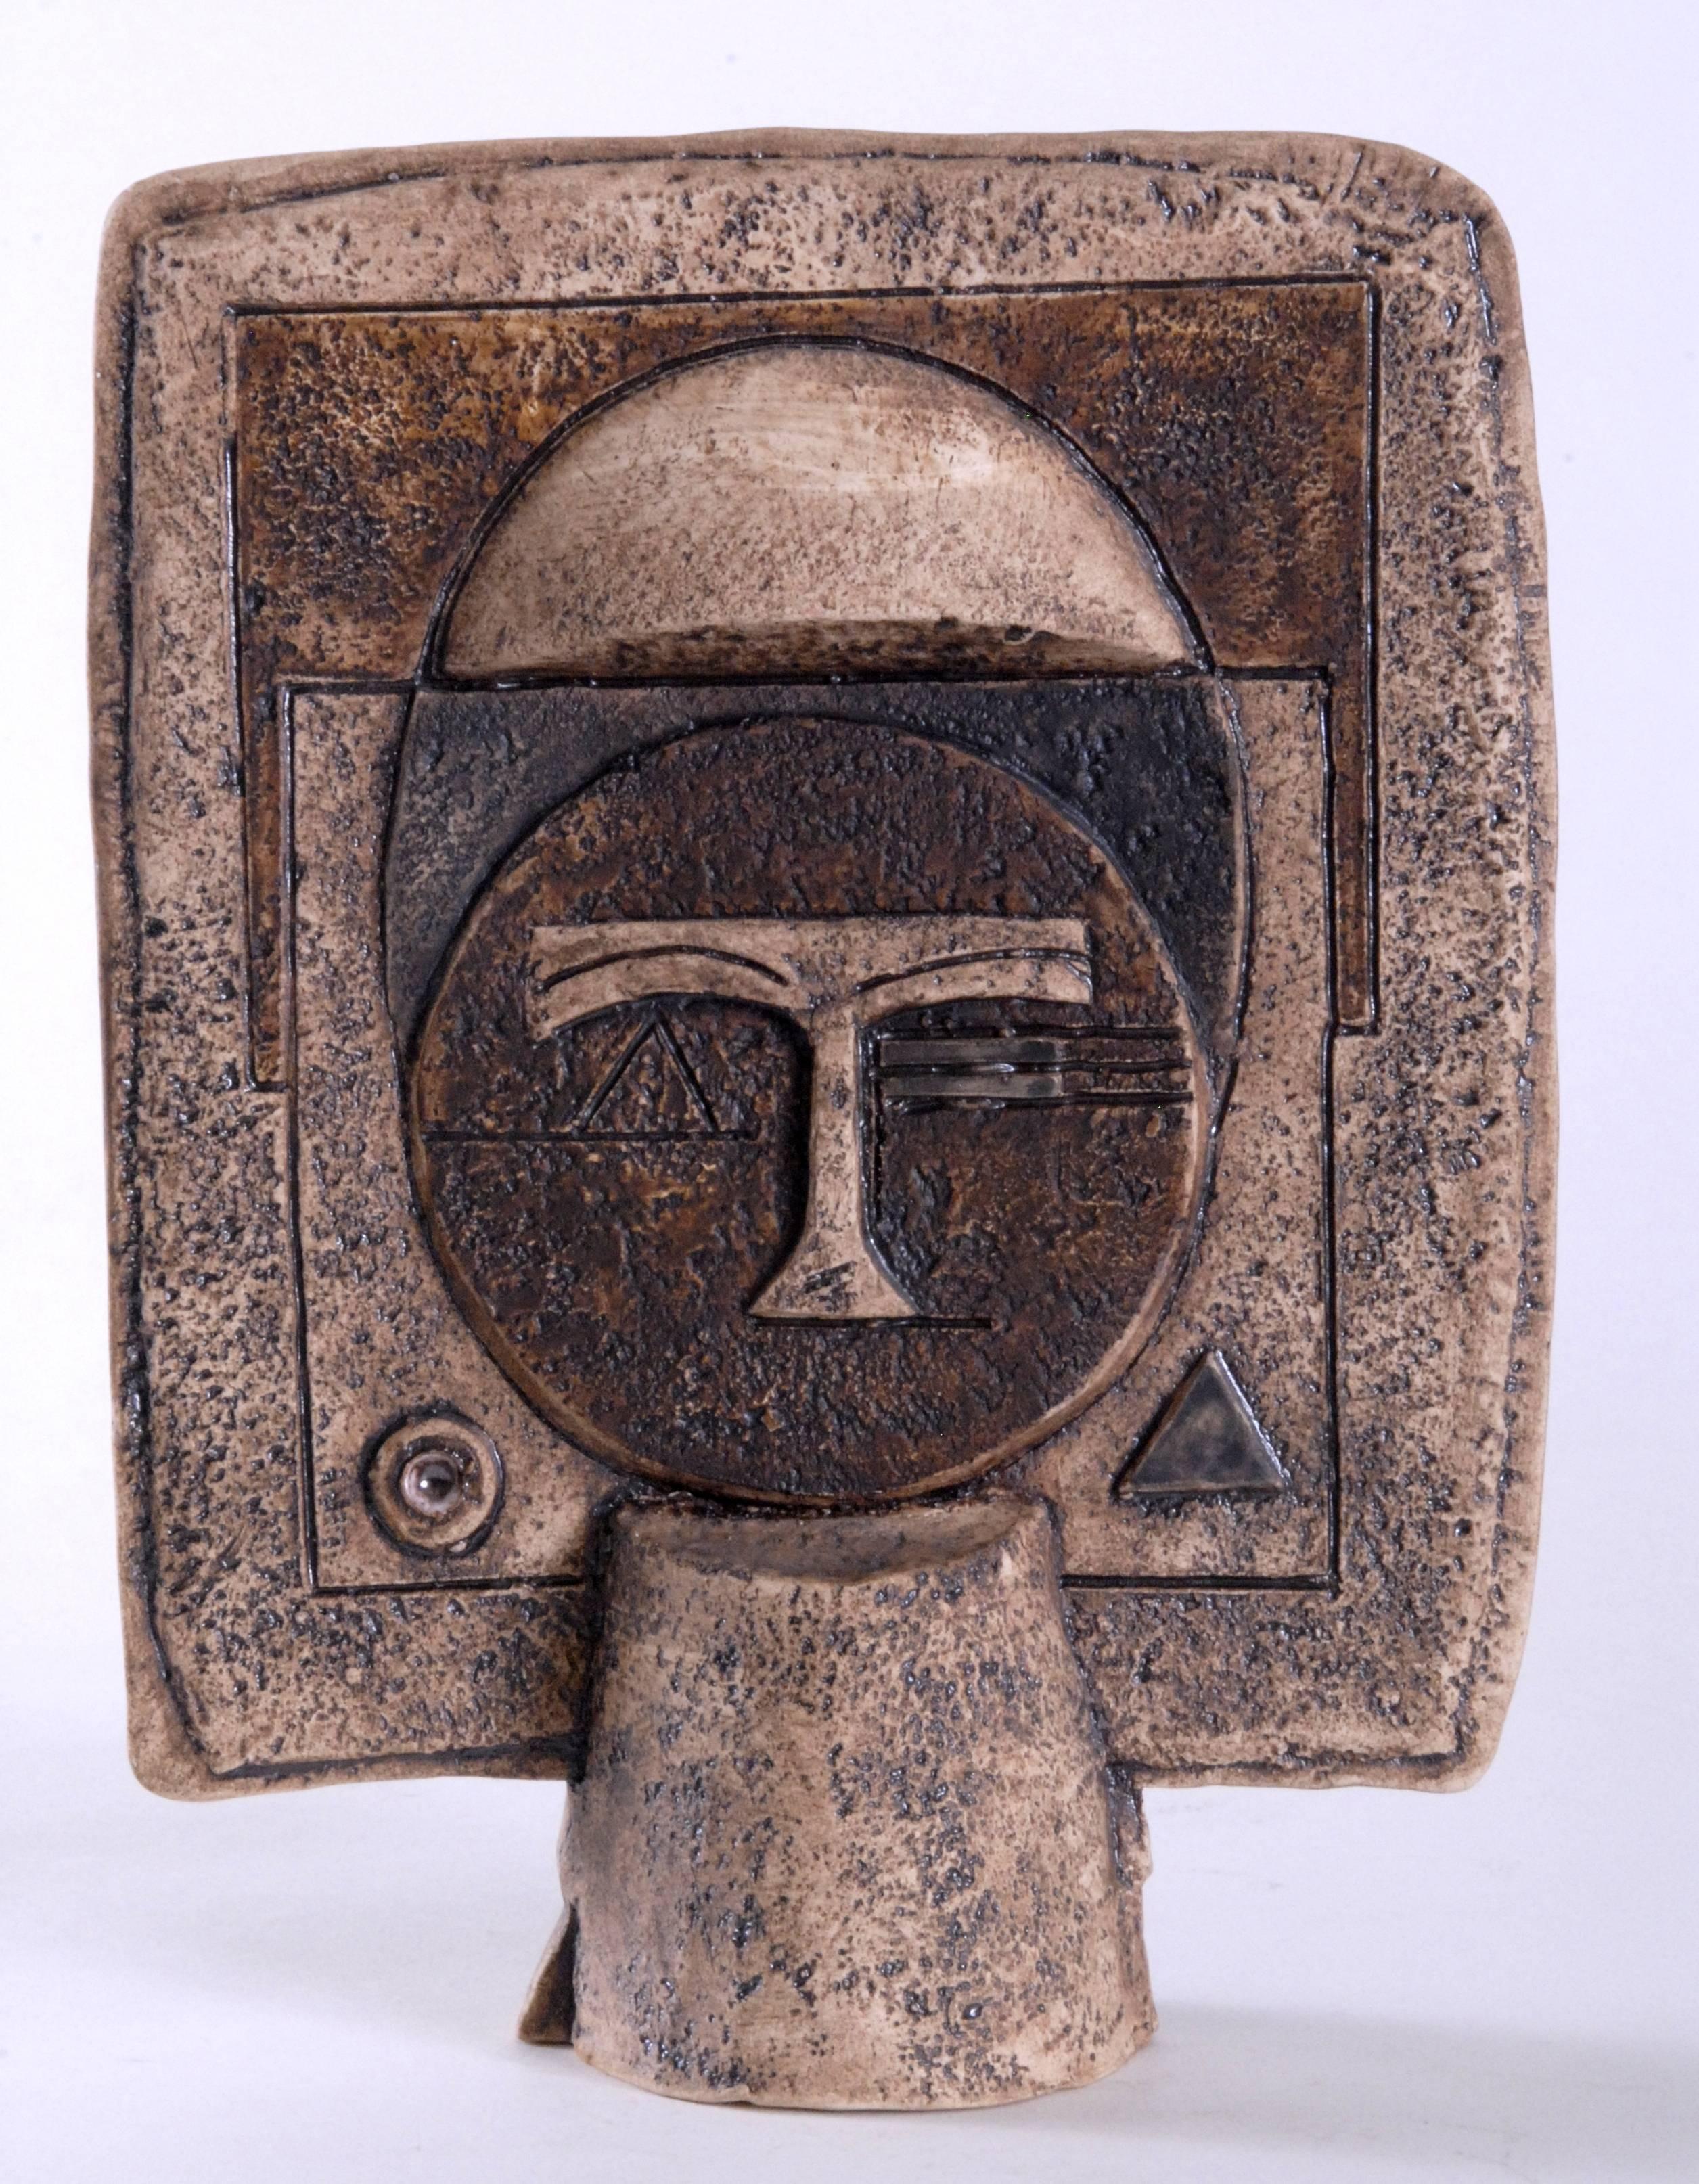 Troika sculptural ware was produced just after moving to Newlyn, the 'Mask' being the fourth design in the series. One side portrays an Aztec style face and the other a Paul Klee abstracted face trying to show the links between ancient history and